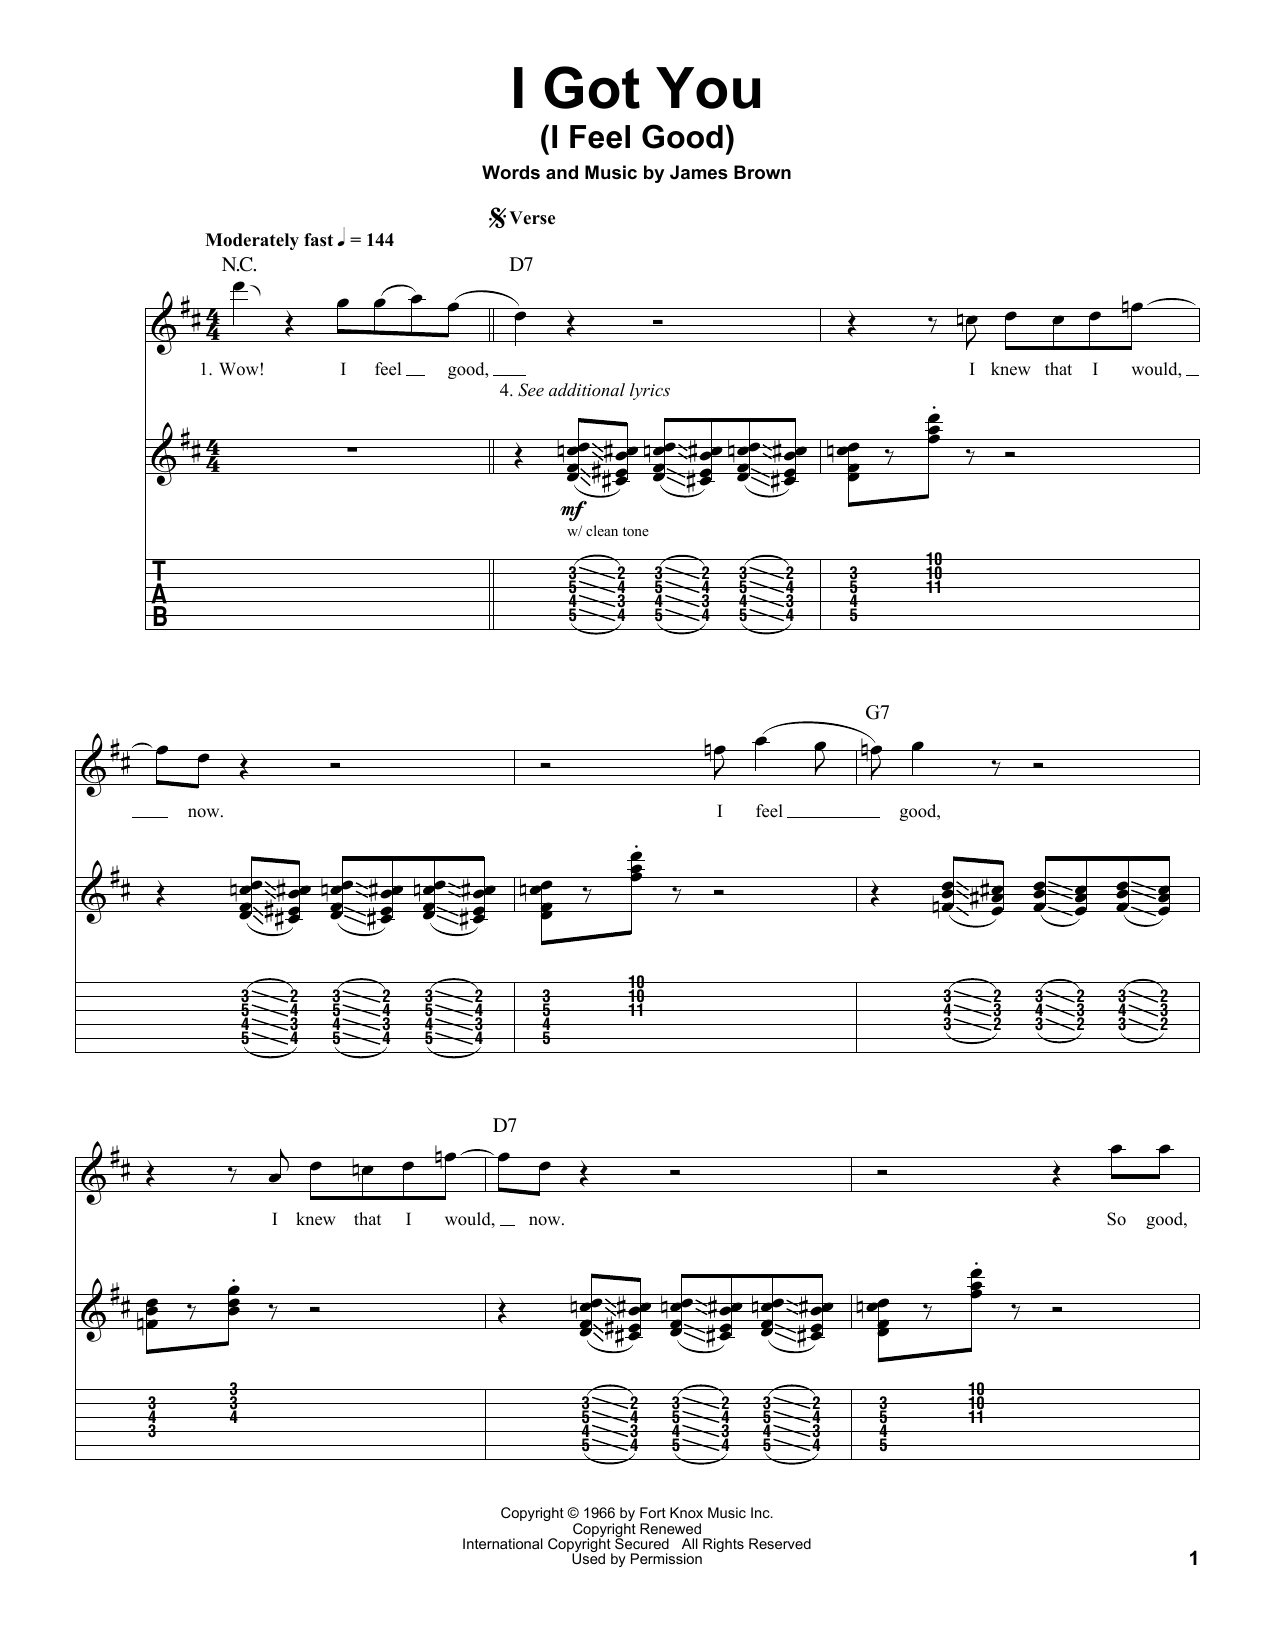 James Brown I Got You (I Feel Good) sheet music notes and chords. Download Printable PDF.